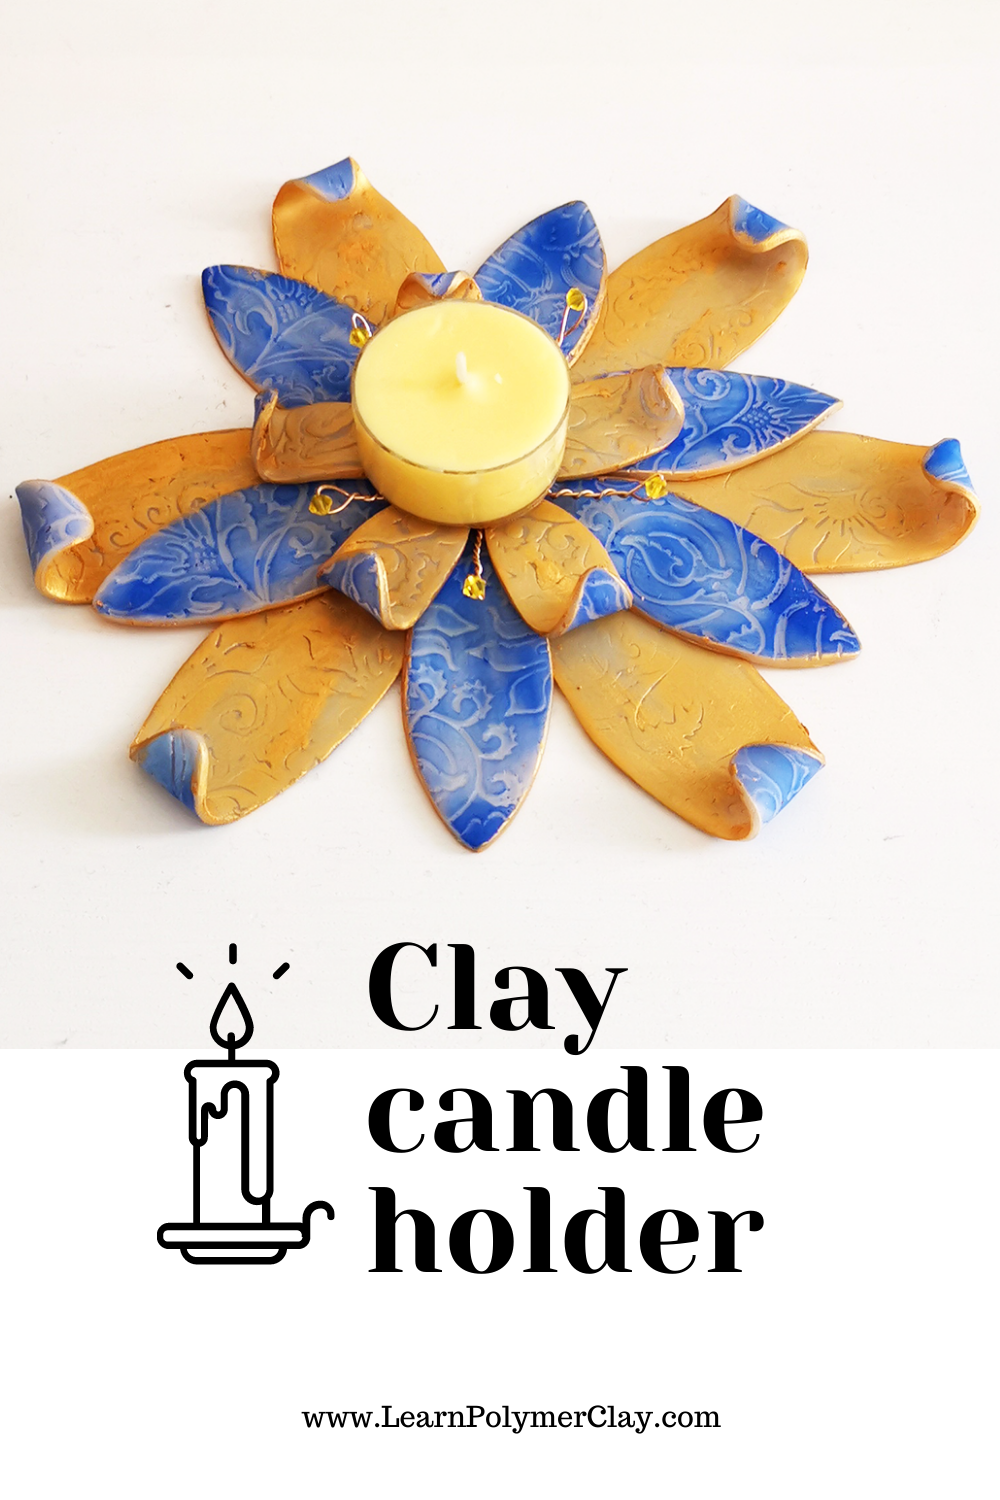 Step-by-step process for making a beautiful clay candle holder for
special occasions